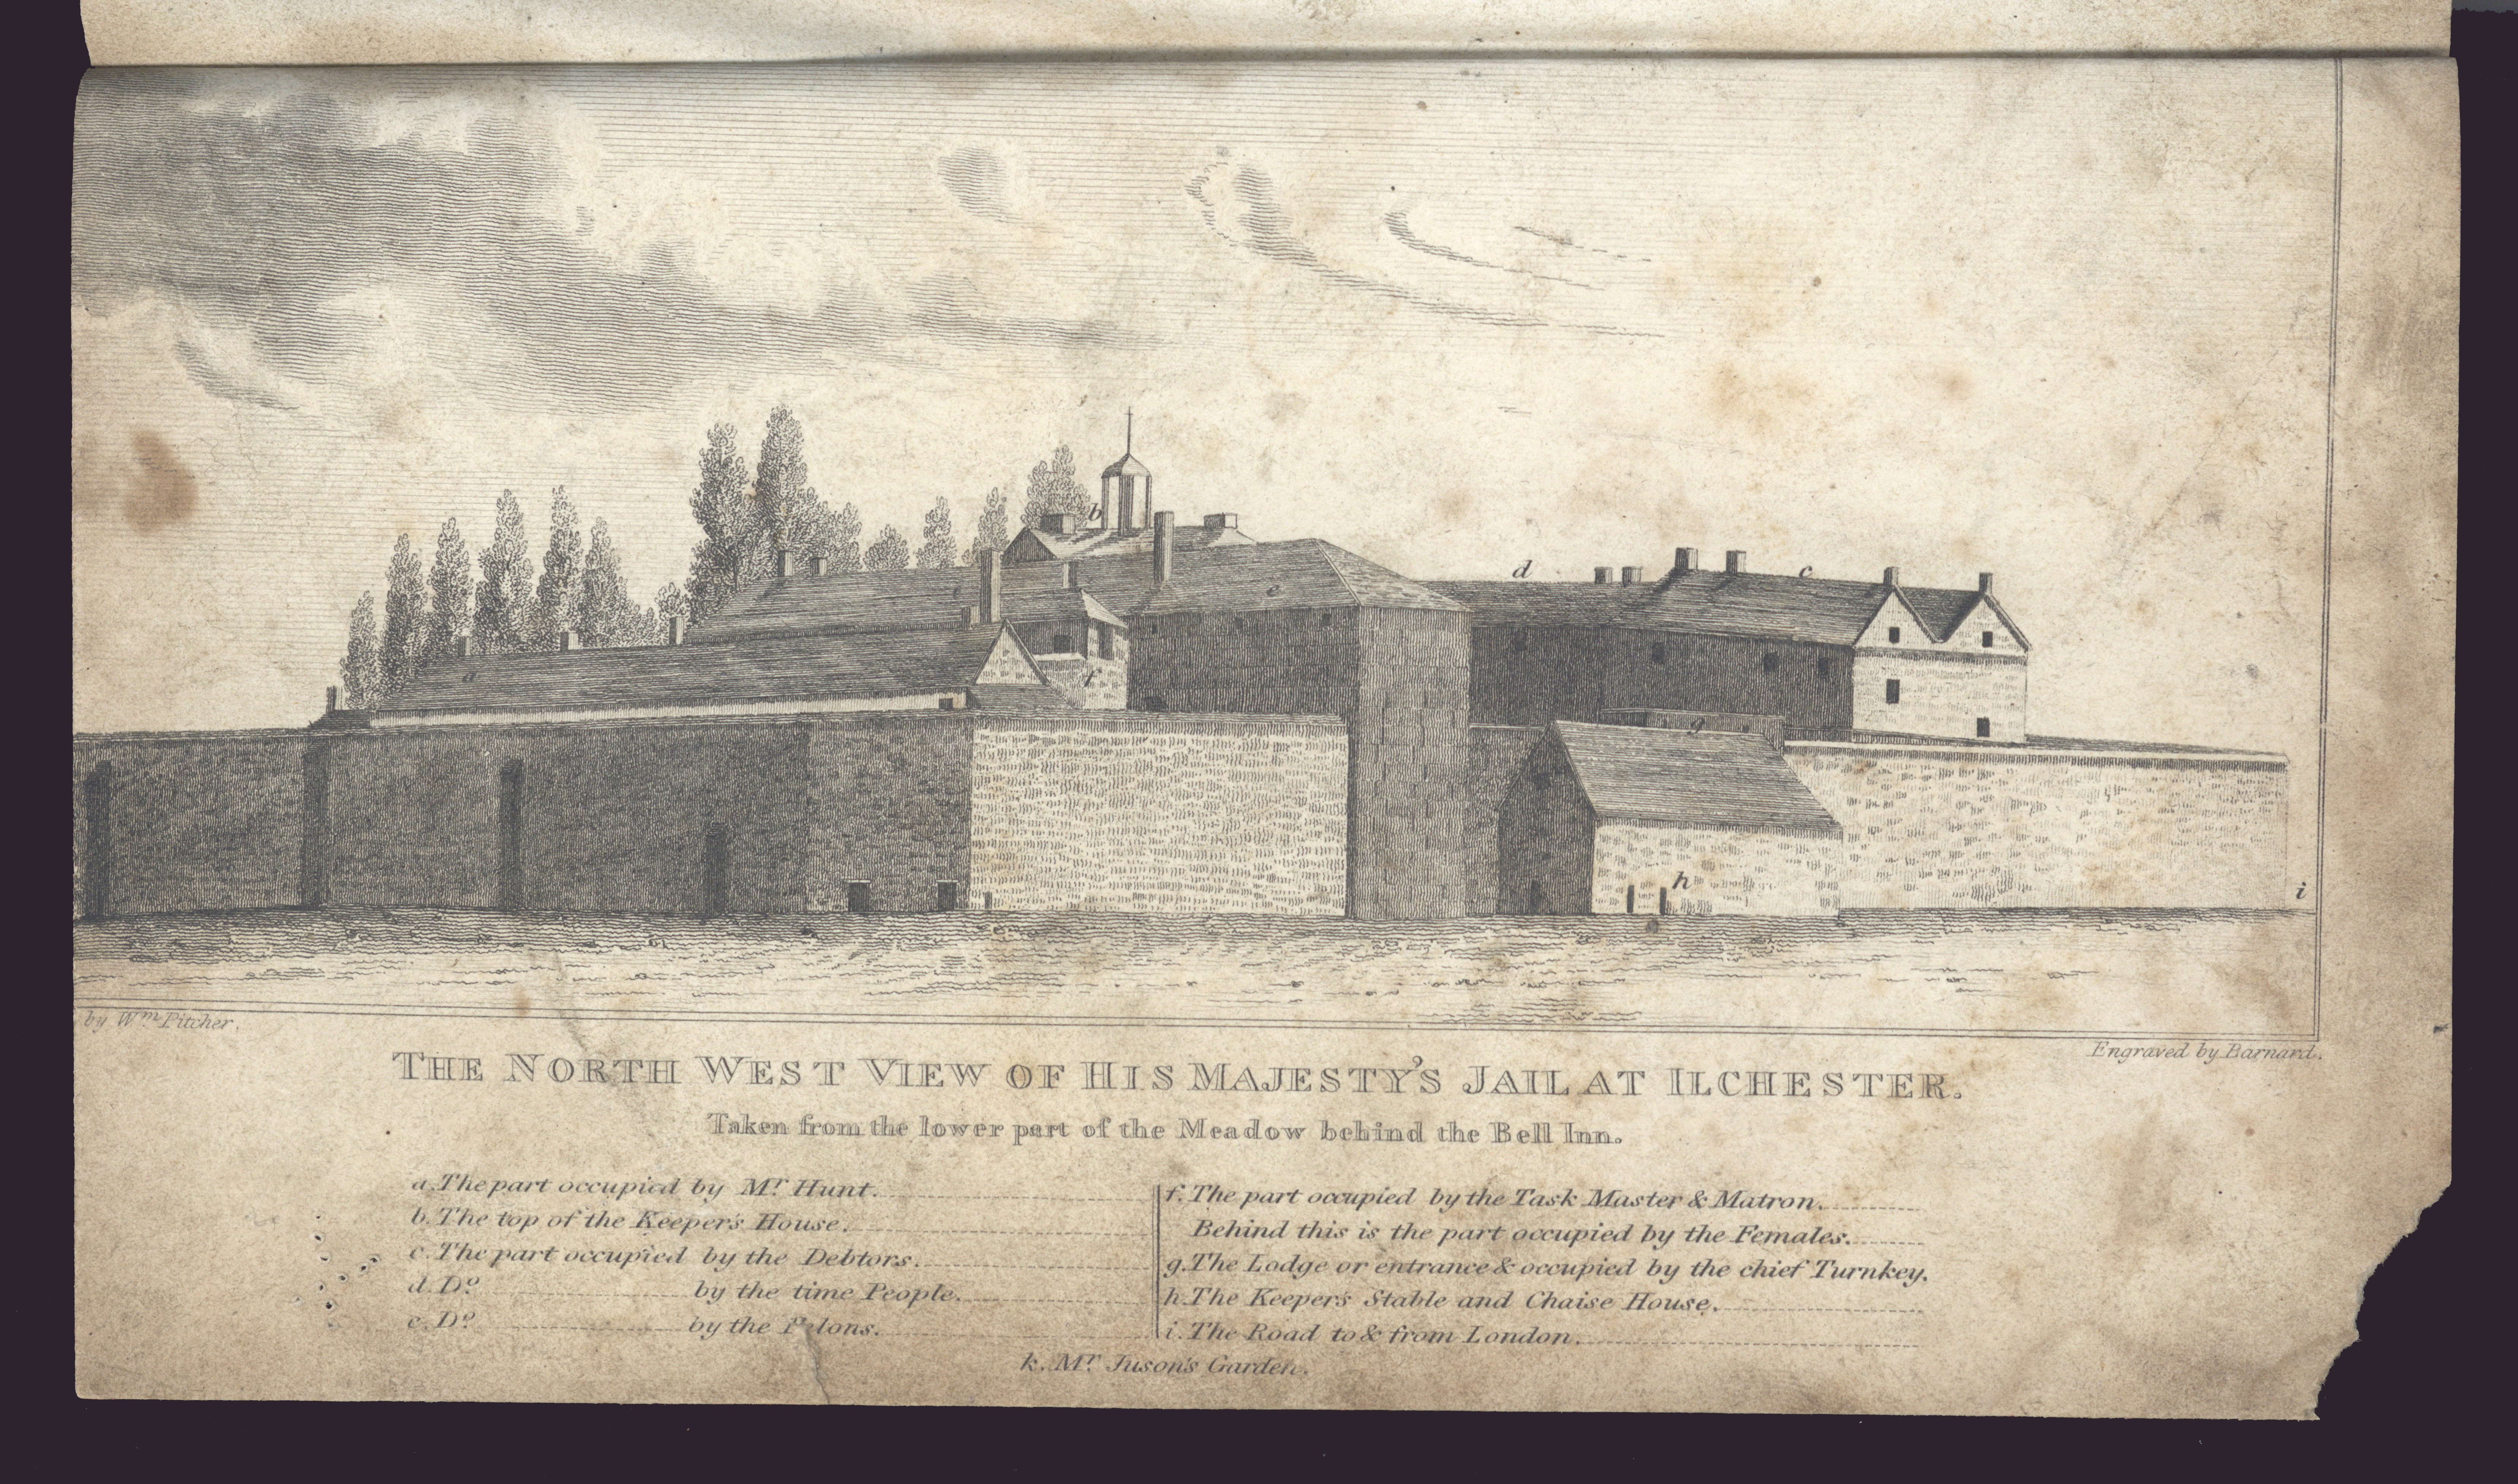 ‘The North West View of his Majesty’s Jail at Ilchester’. From: Memoirs of Henry Hunt, Esq. Written by Himself, in His Majesty’s Jail at Ilchester, in the County of Somerset (London: T. Dolby, 1820) 19th Century Collection 942.073 HUN